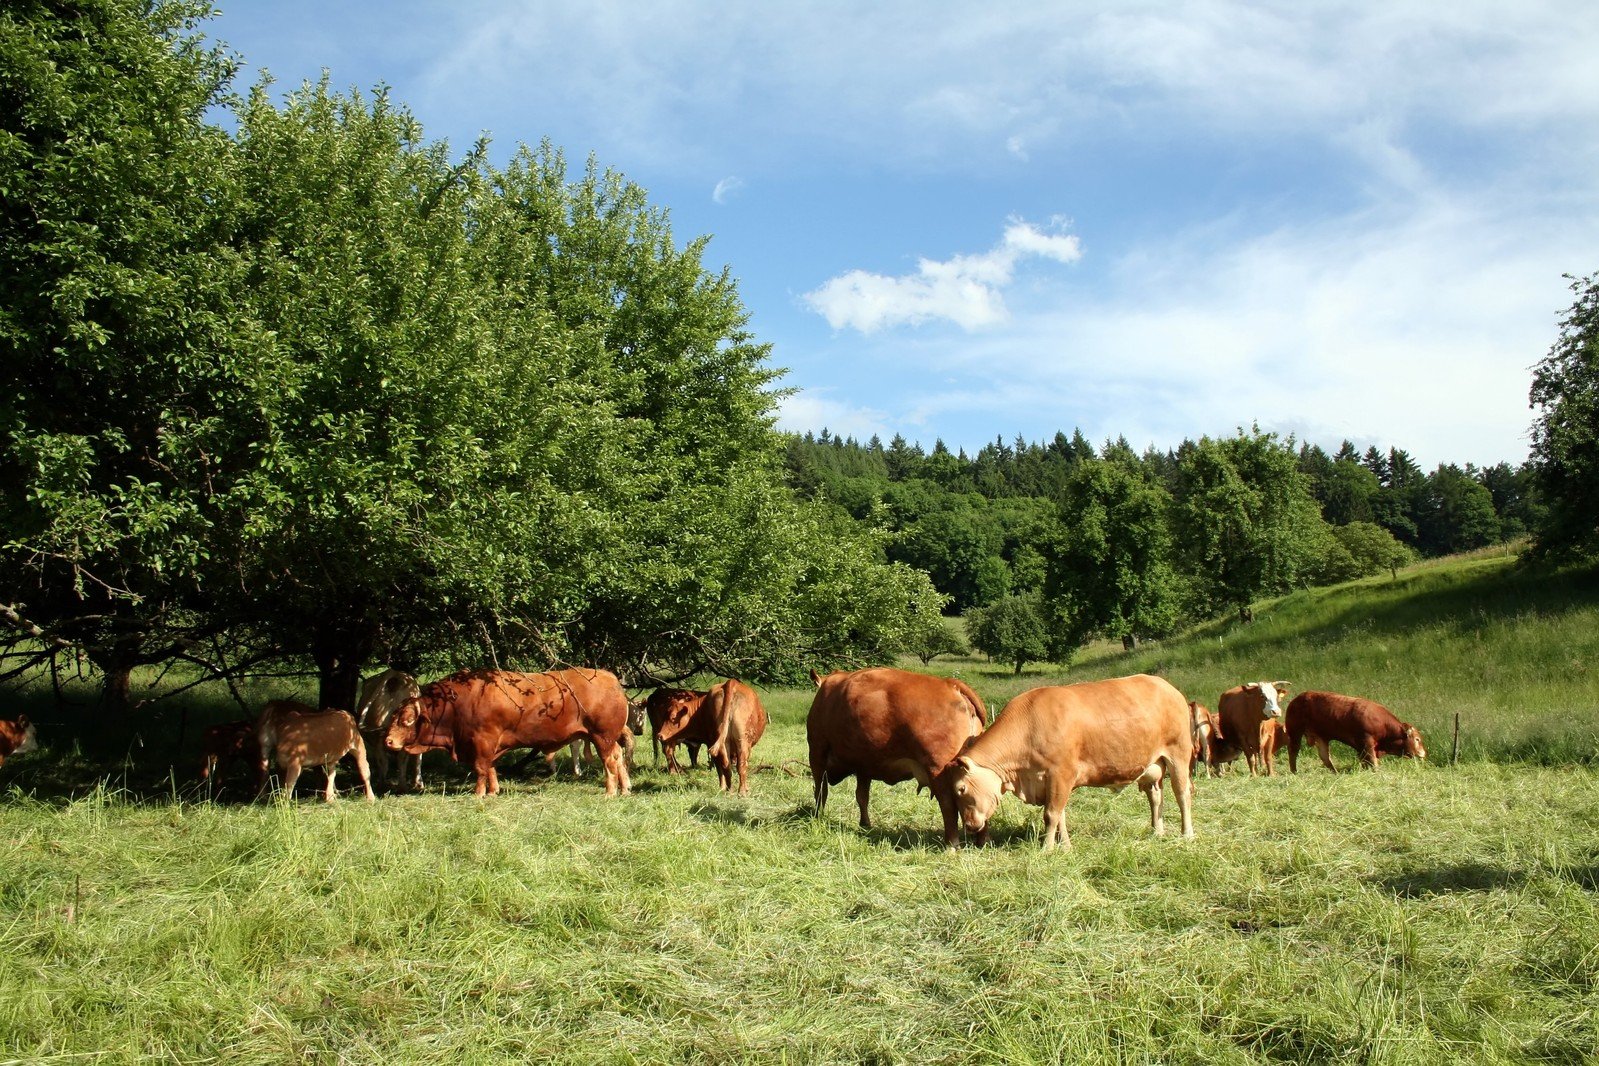 a herd of cattle are in the middle of a field